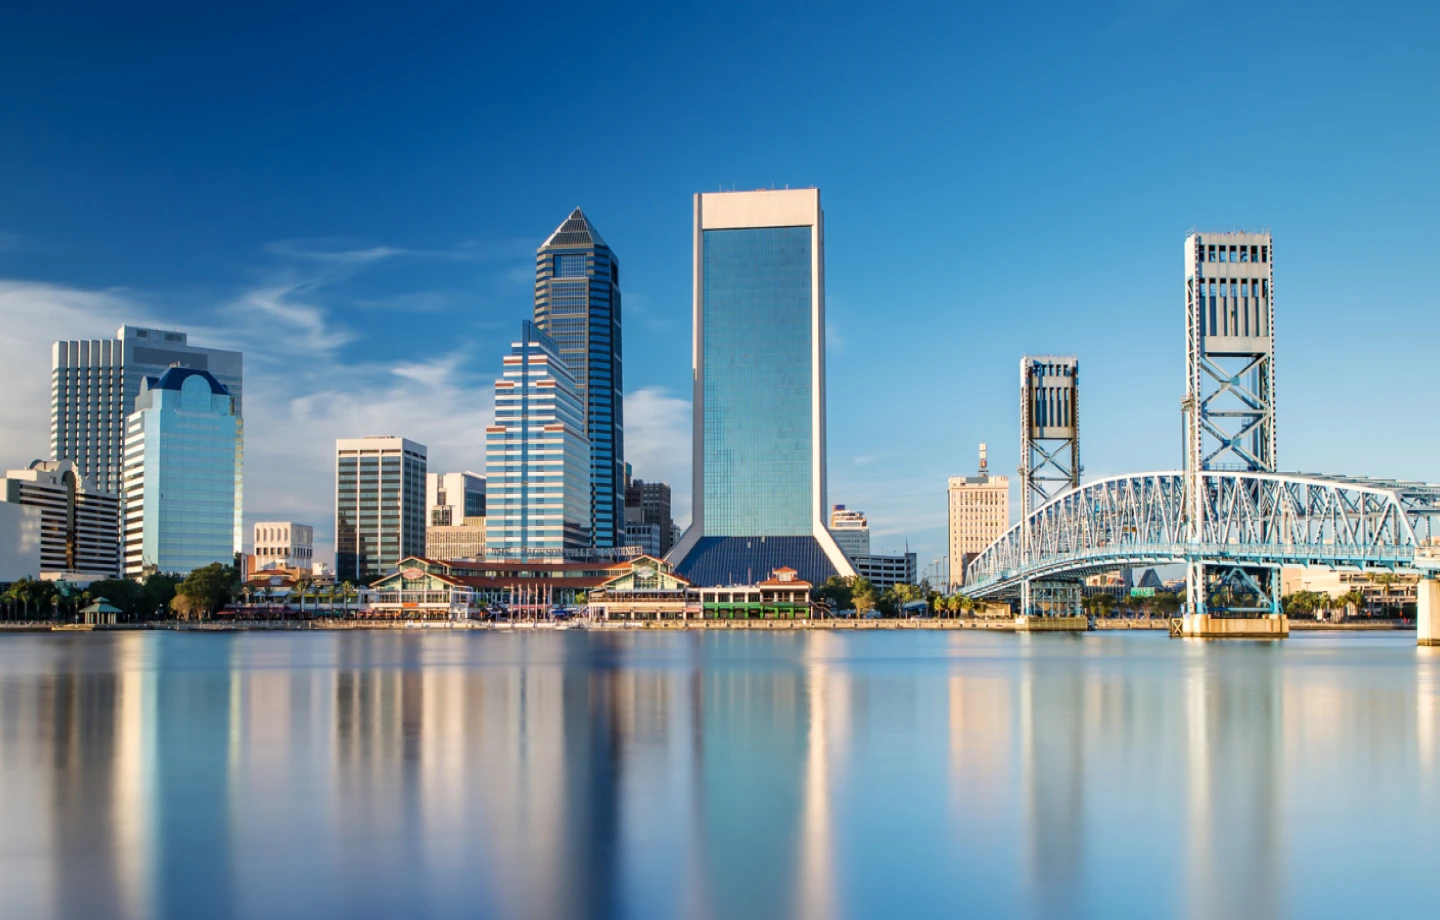 A view of the Jacksonville skyline reflected onto water at midday